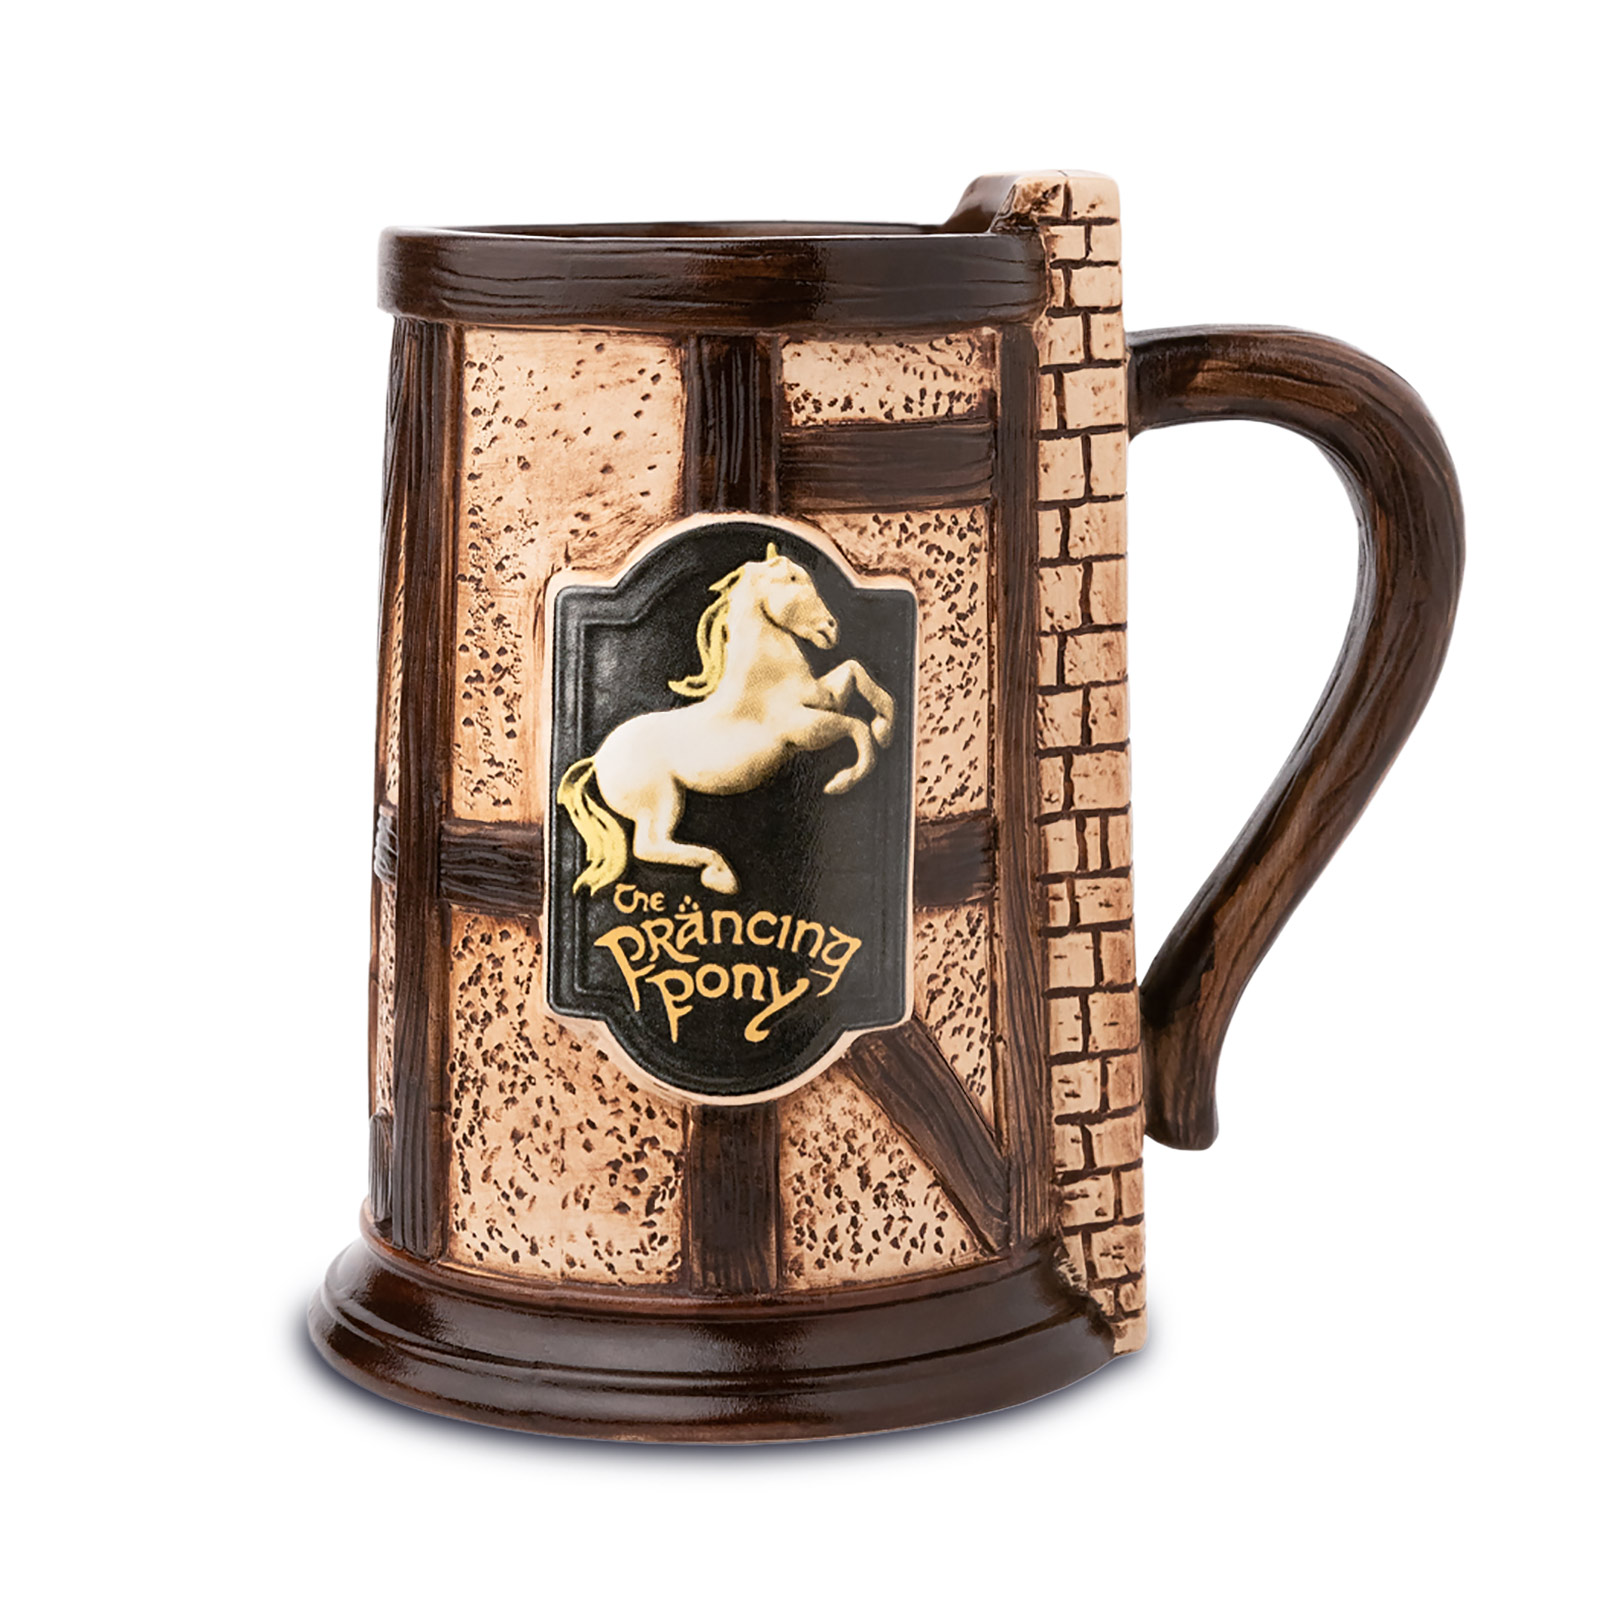 Lord of the Rings - The Prancing Pony Coat of Arms Mug